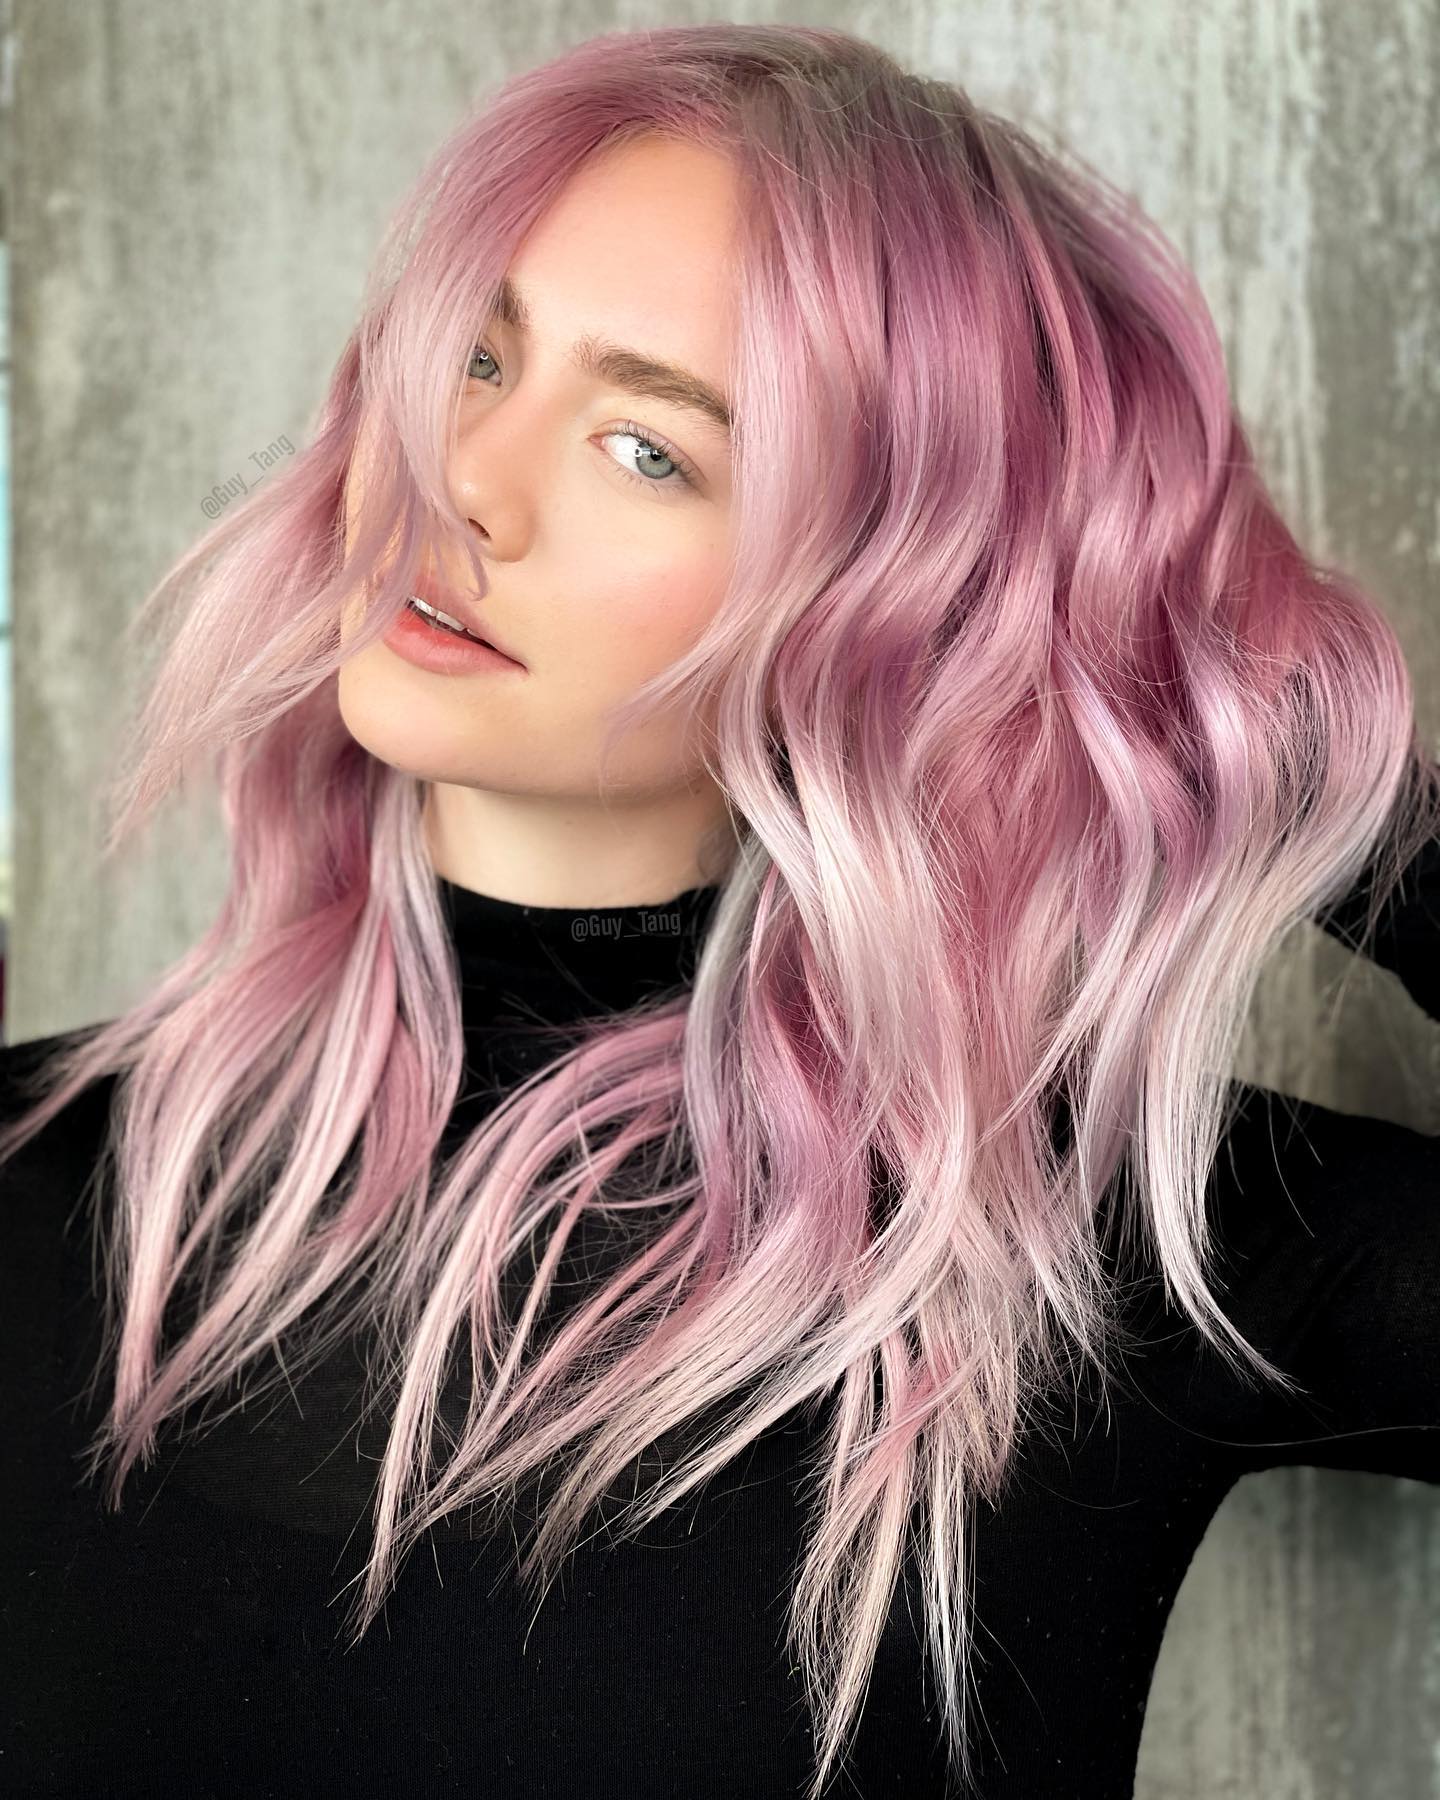 Balayage-Hair-Colors.-1 Top 75+ Hair Color Ideas for Women in 2022